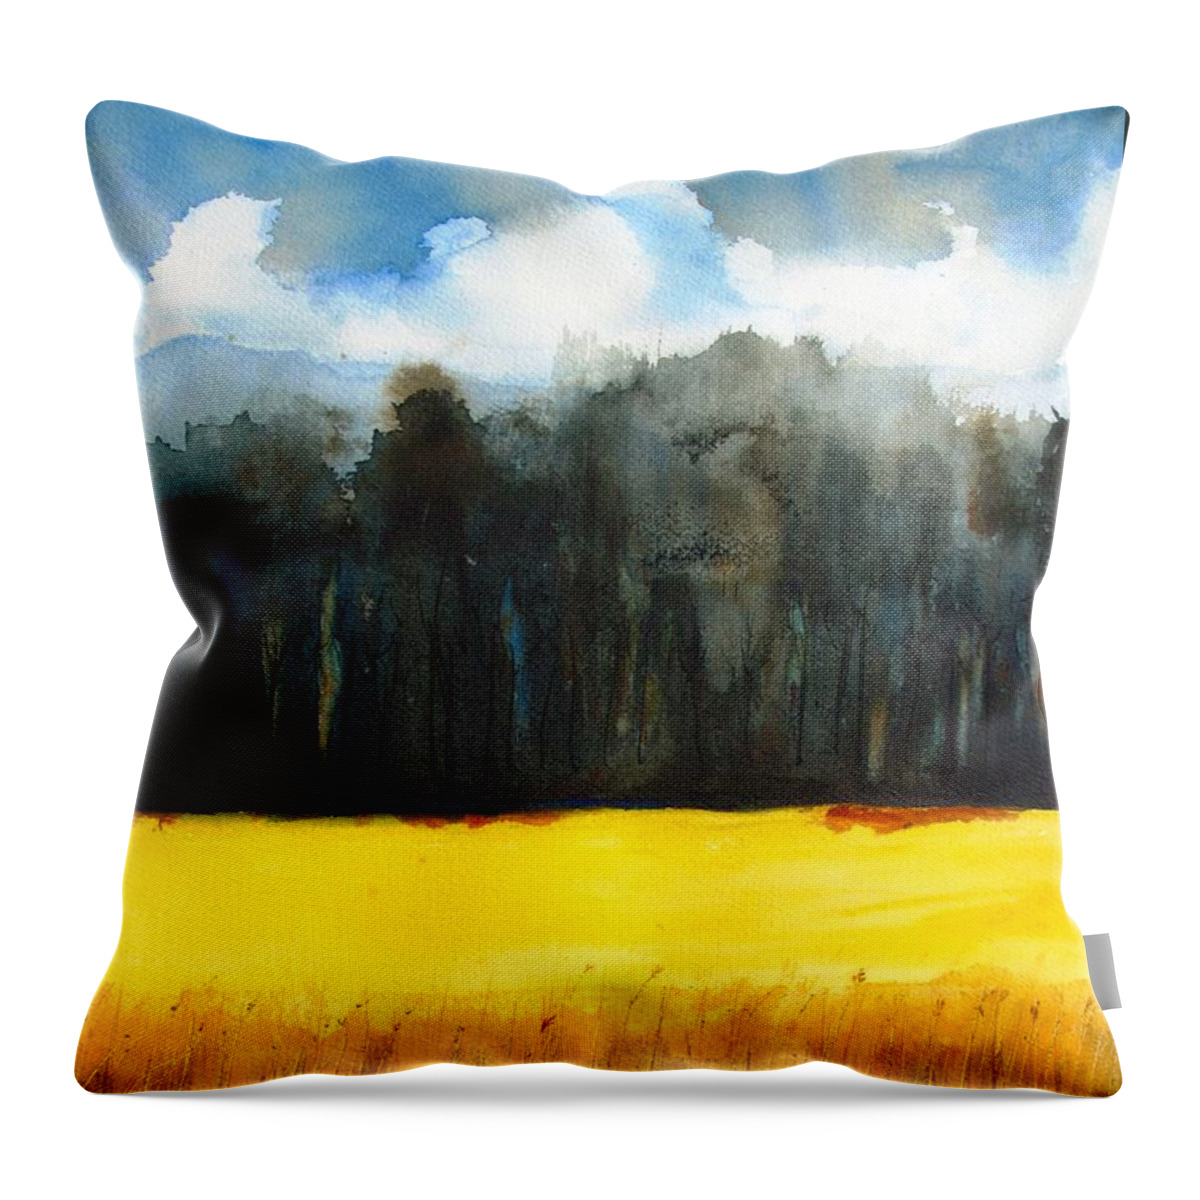 Wheat Field Throw Pillow featuring the painting Wheat Field 1 by Carlin Blahnik CarlinArtWatercolor